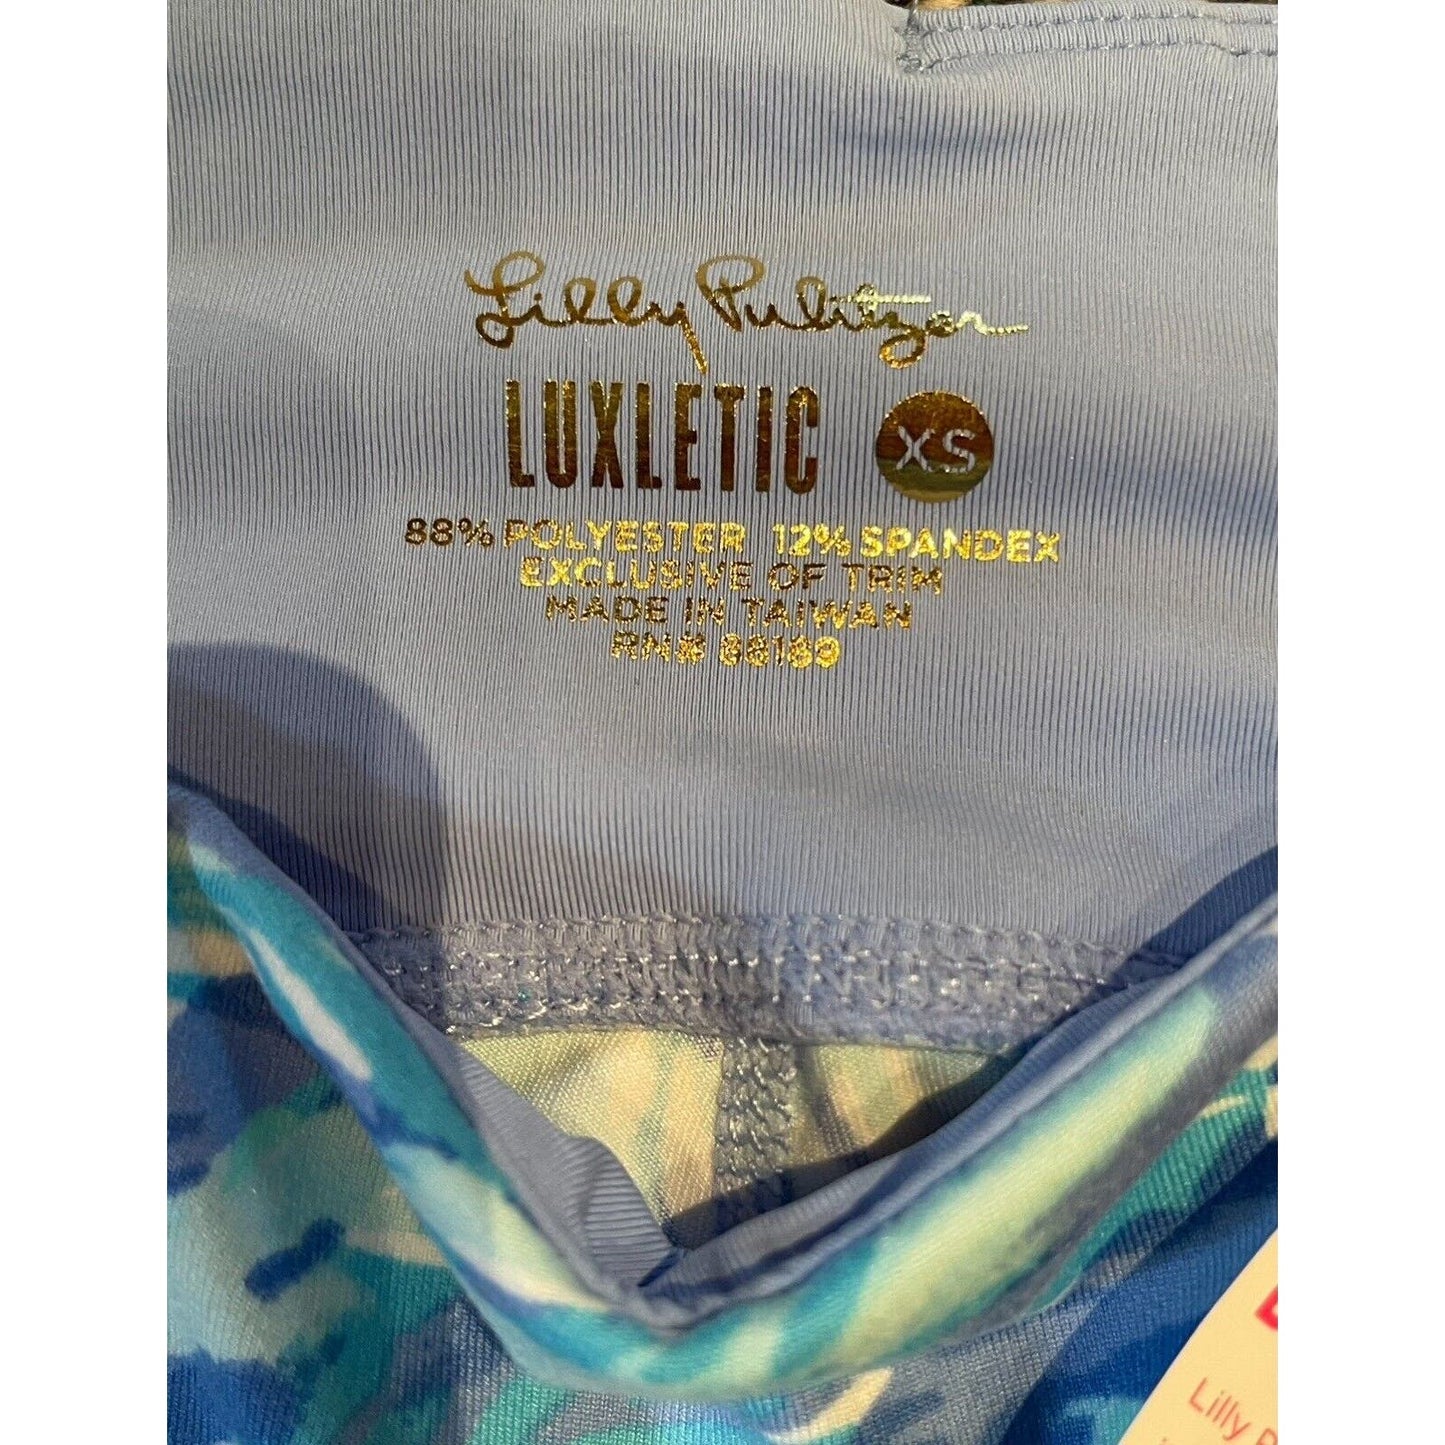 Lilly Pulitzer Luxletic Size XS Weekender Leggings UPF 50+ Brand New NWT